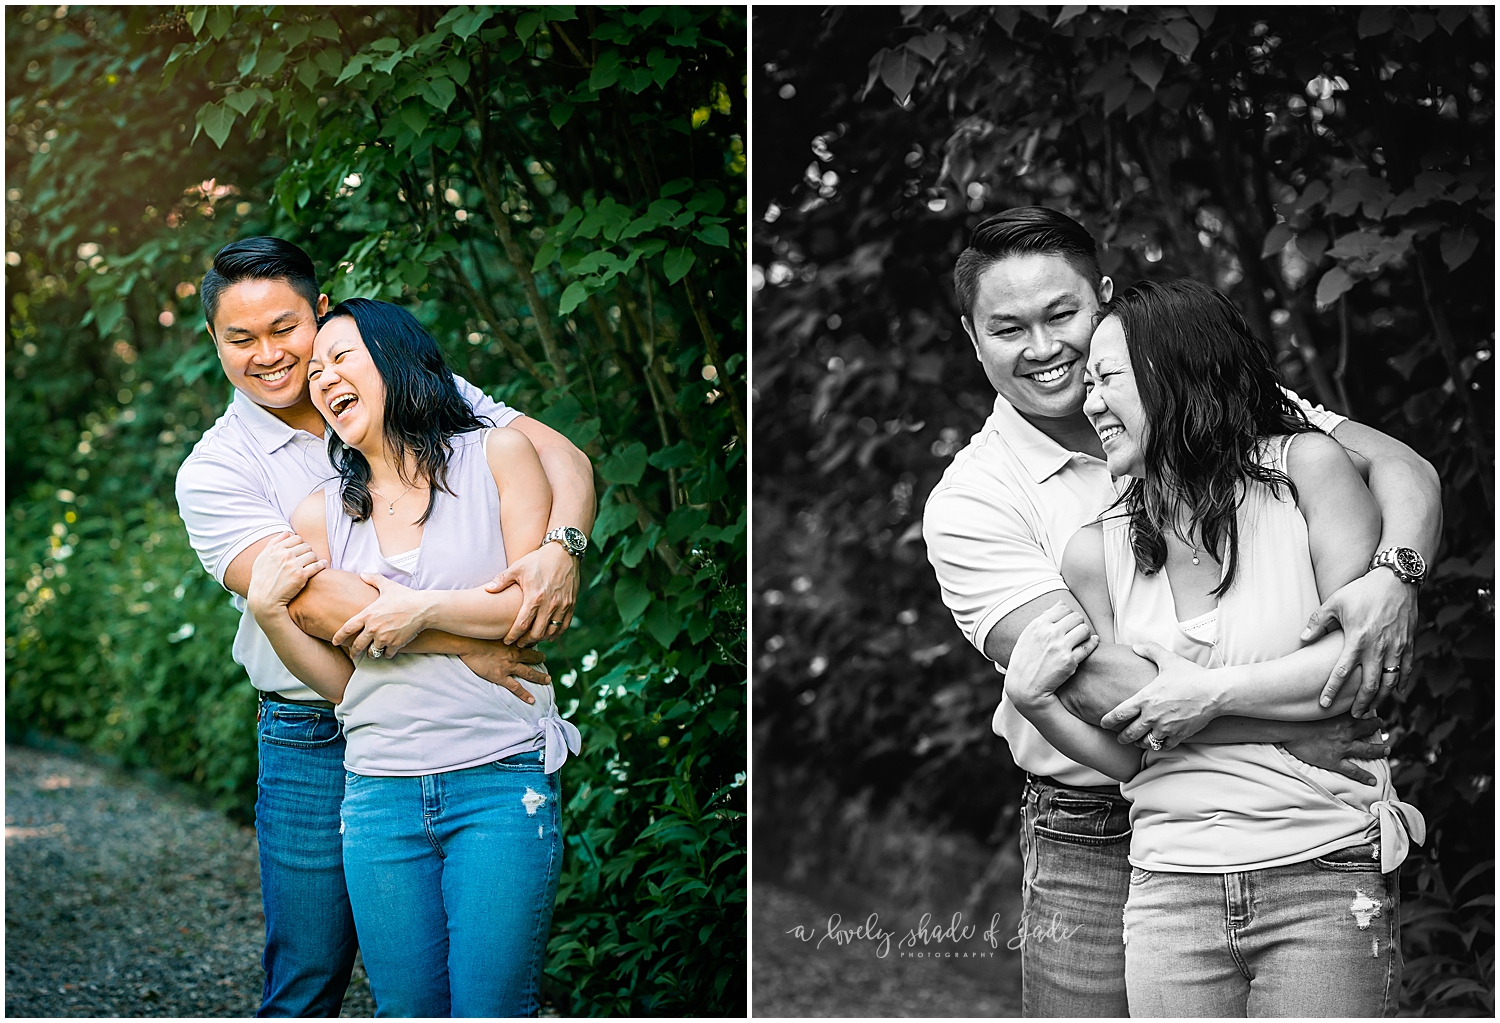 Fun_Extended_Family_Session_Morristown_NJ_Photography_0004.jpg